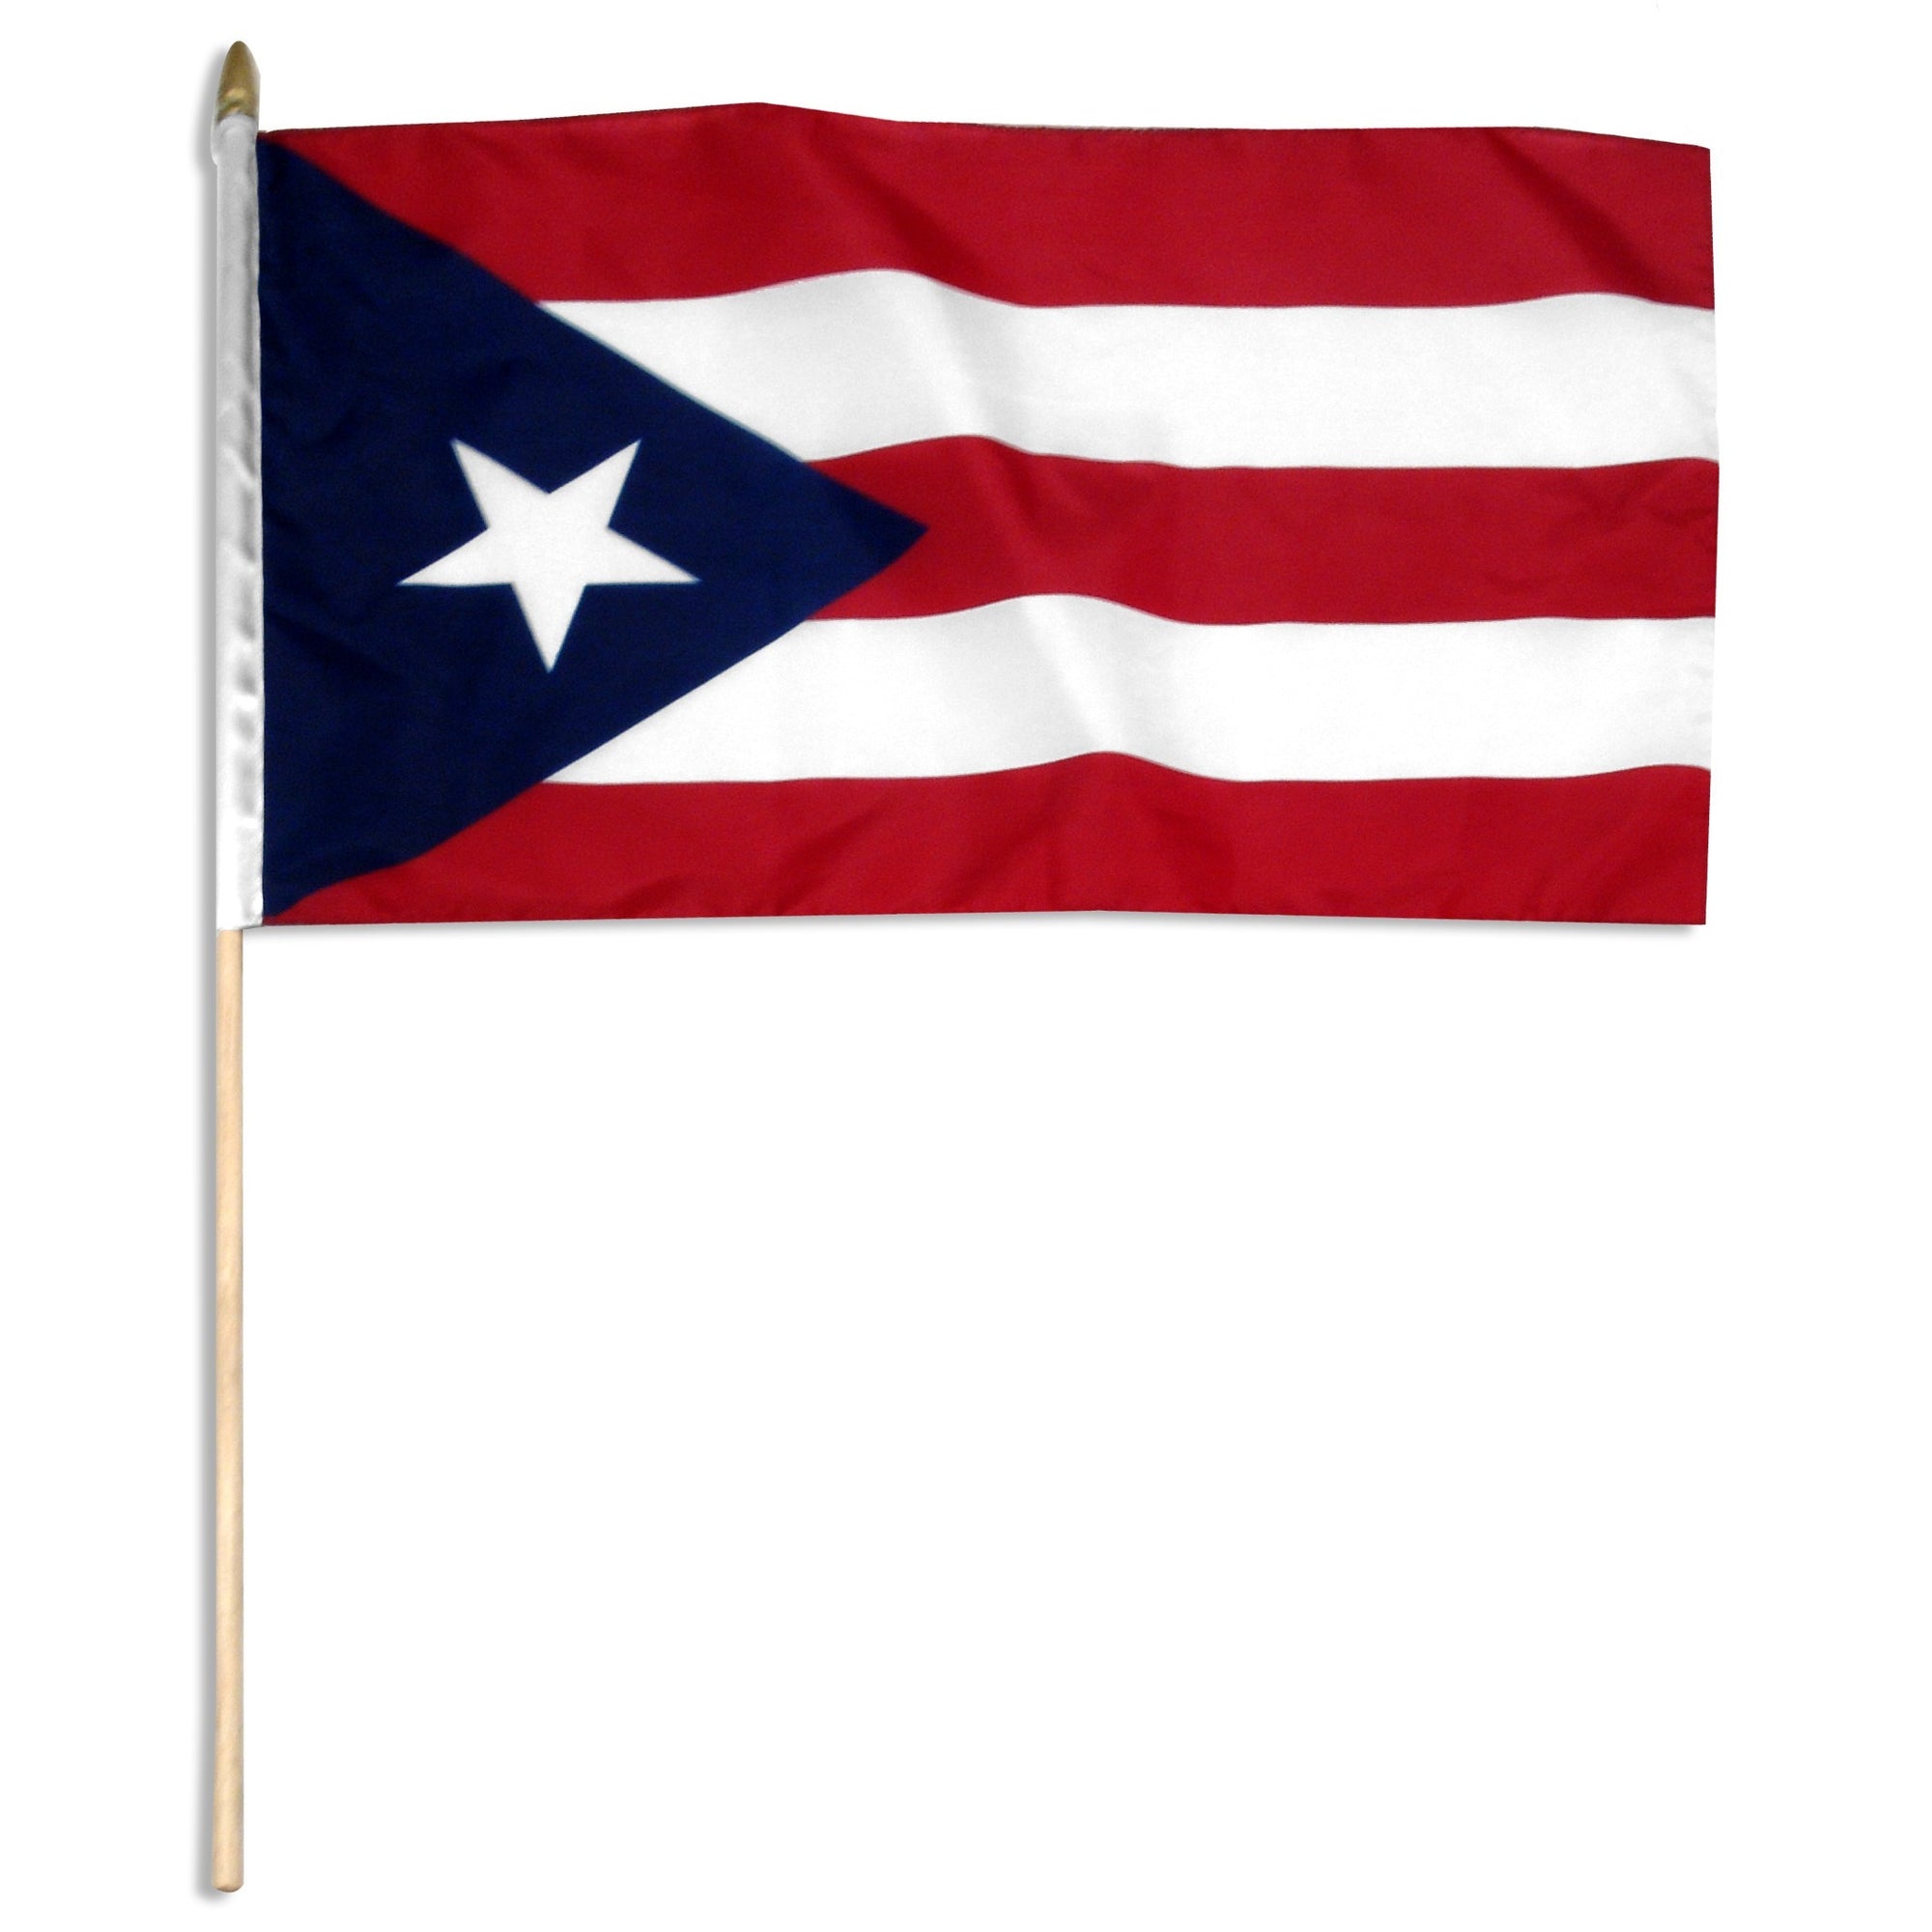 Puerto Rico flag for sale